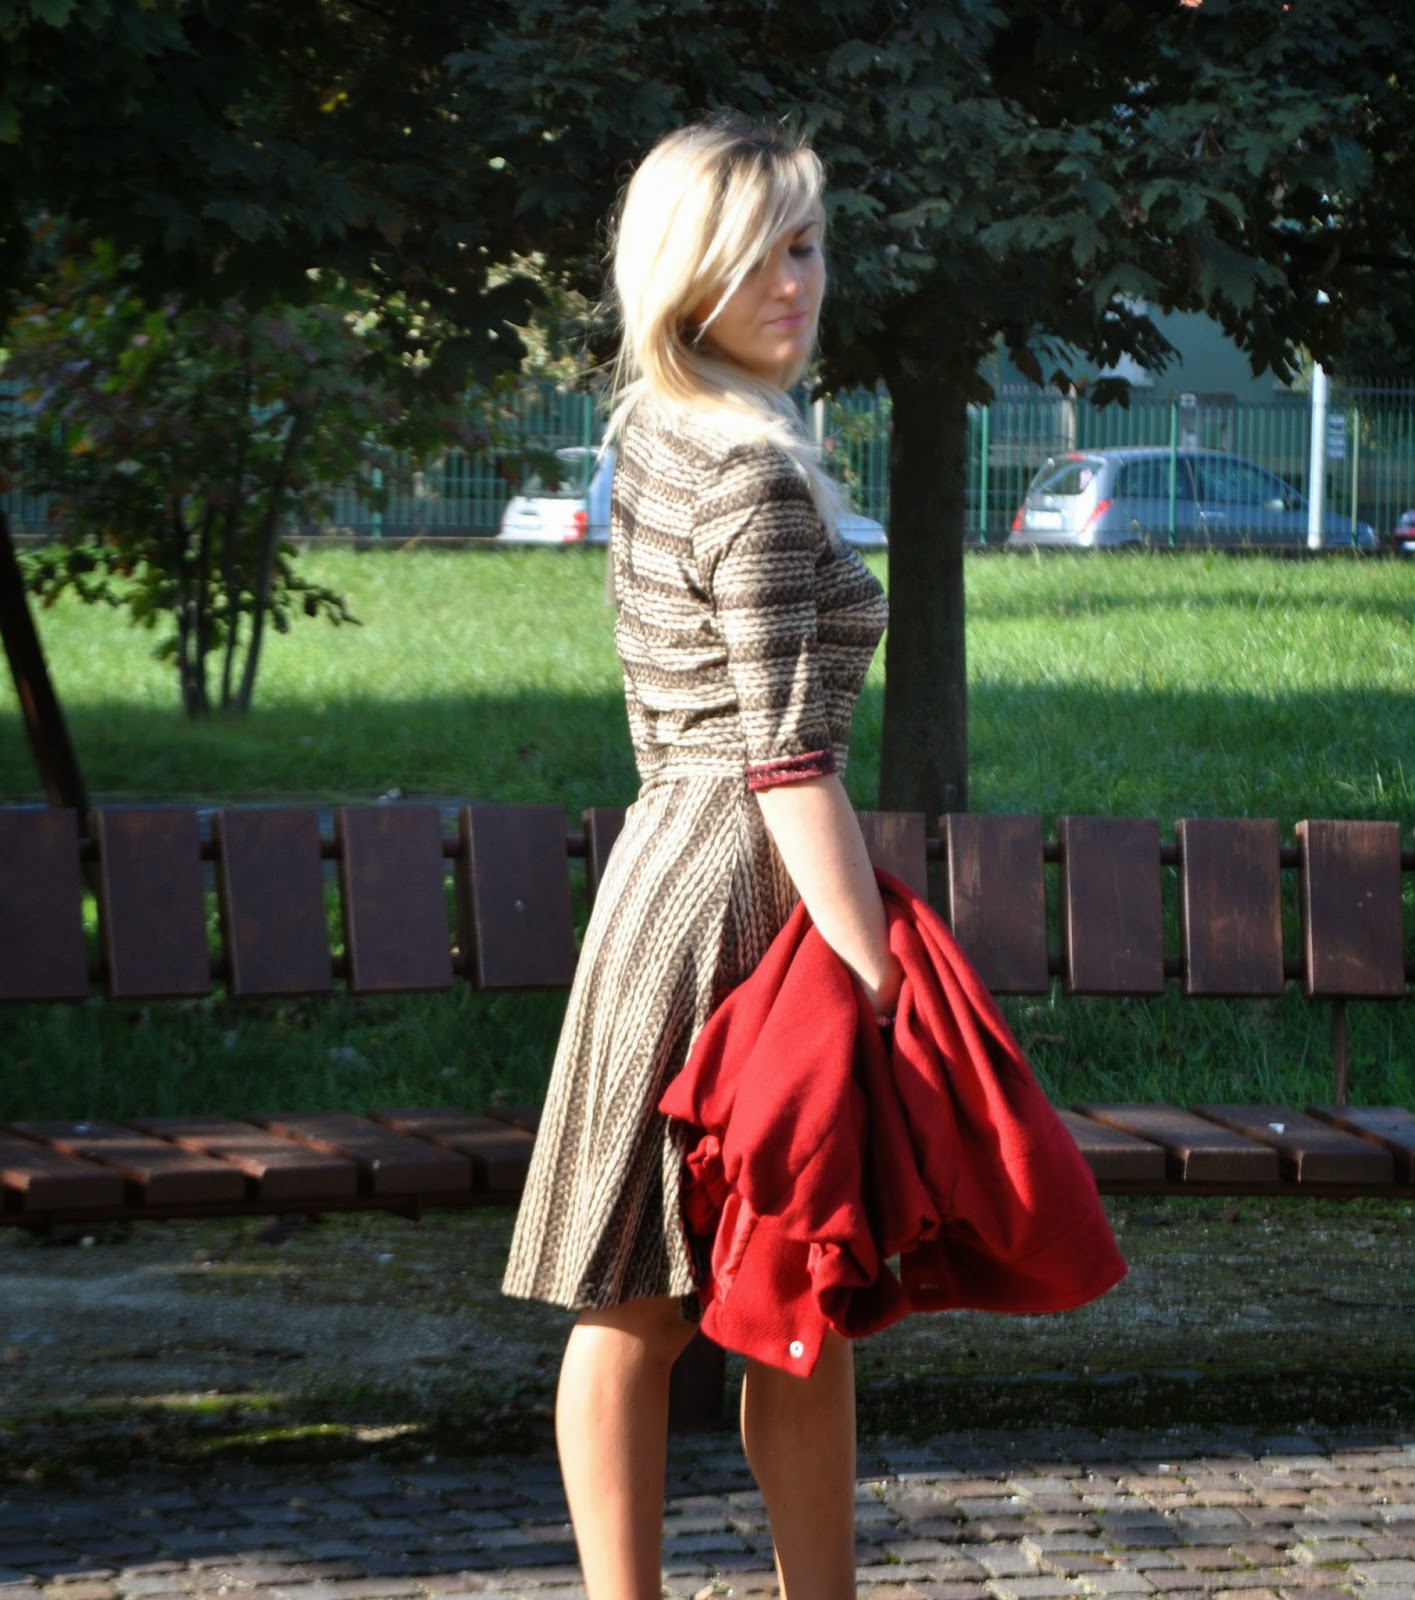 autumnal outfit printed dress red coat how to wear red coat how to wear printed dress fashion bloggers italy italian girl  outfit abito con gonna a ruota con stampa maglione di lana stampa lana abito gonna a ruota abiti invernali cappotto rosso outfit cappotto rosso come abbinare il cappotto rosso midi skirt how to wear red coat how to wear midi skirt winter dresses orecchini chandelier majique chandelier earrings majique decollete beige cappotto rosso sisley abito stampato fashion blogger italiane fashion blogger milano fashion blogger bionde ragazze bionde smalto color sangria scarpe benetton borsa louis vuitton mariafelicia magno fashion blogger mariafelicia magno colorblock by felym outfit ottobre 2014 outfit autunnali outfit invernali 